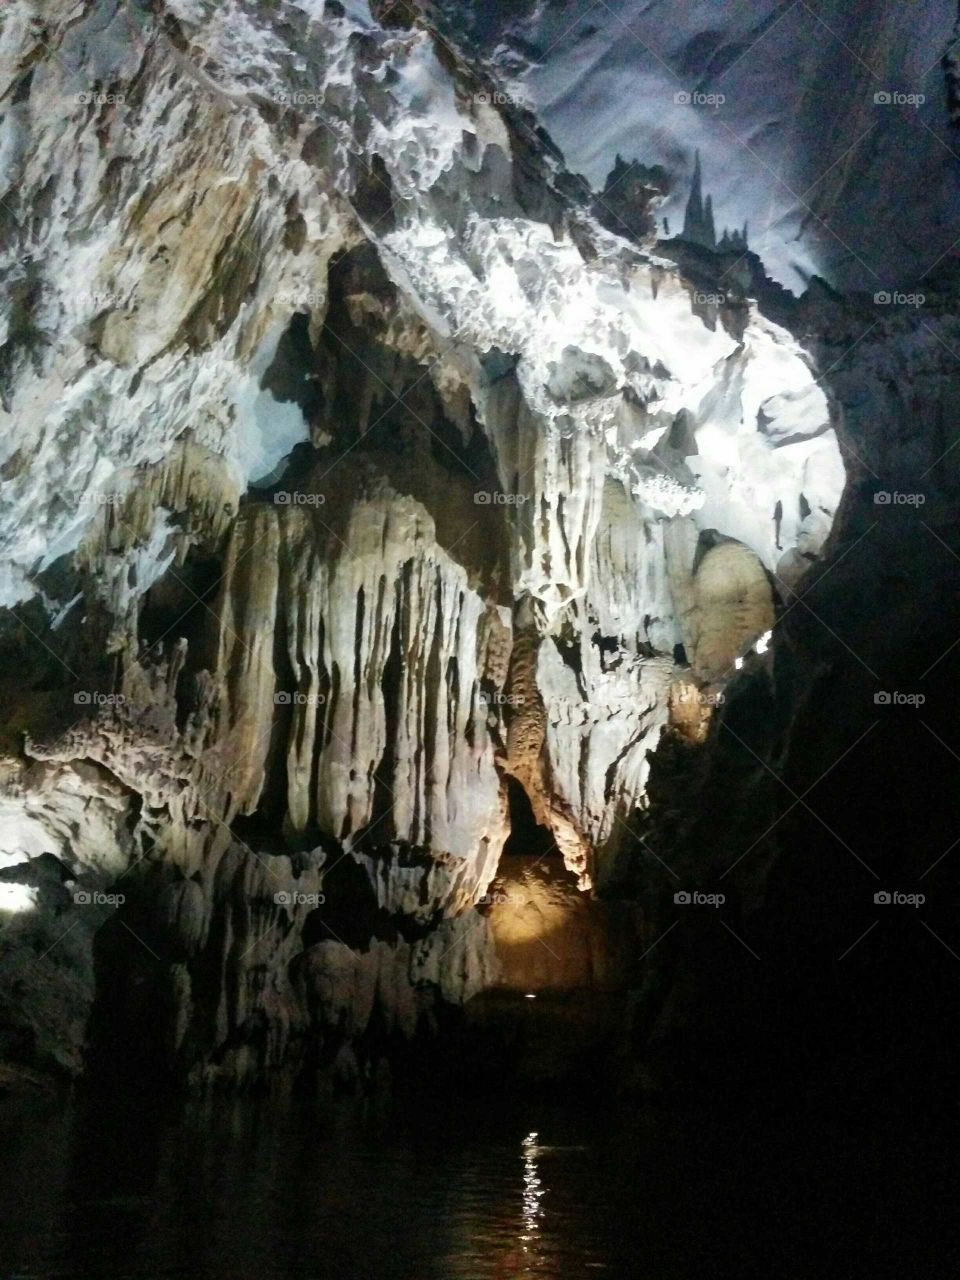 Cave, Subway System, Stalactite, Water, Limestone